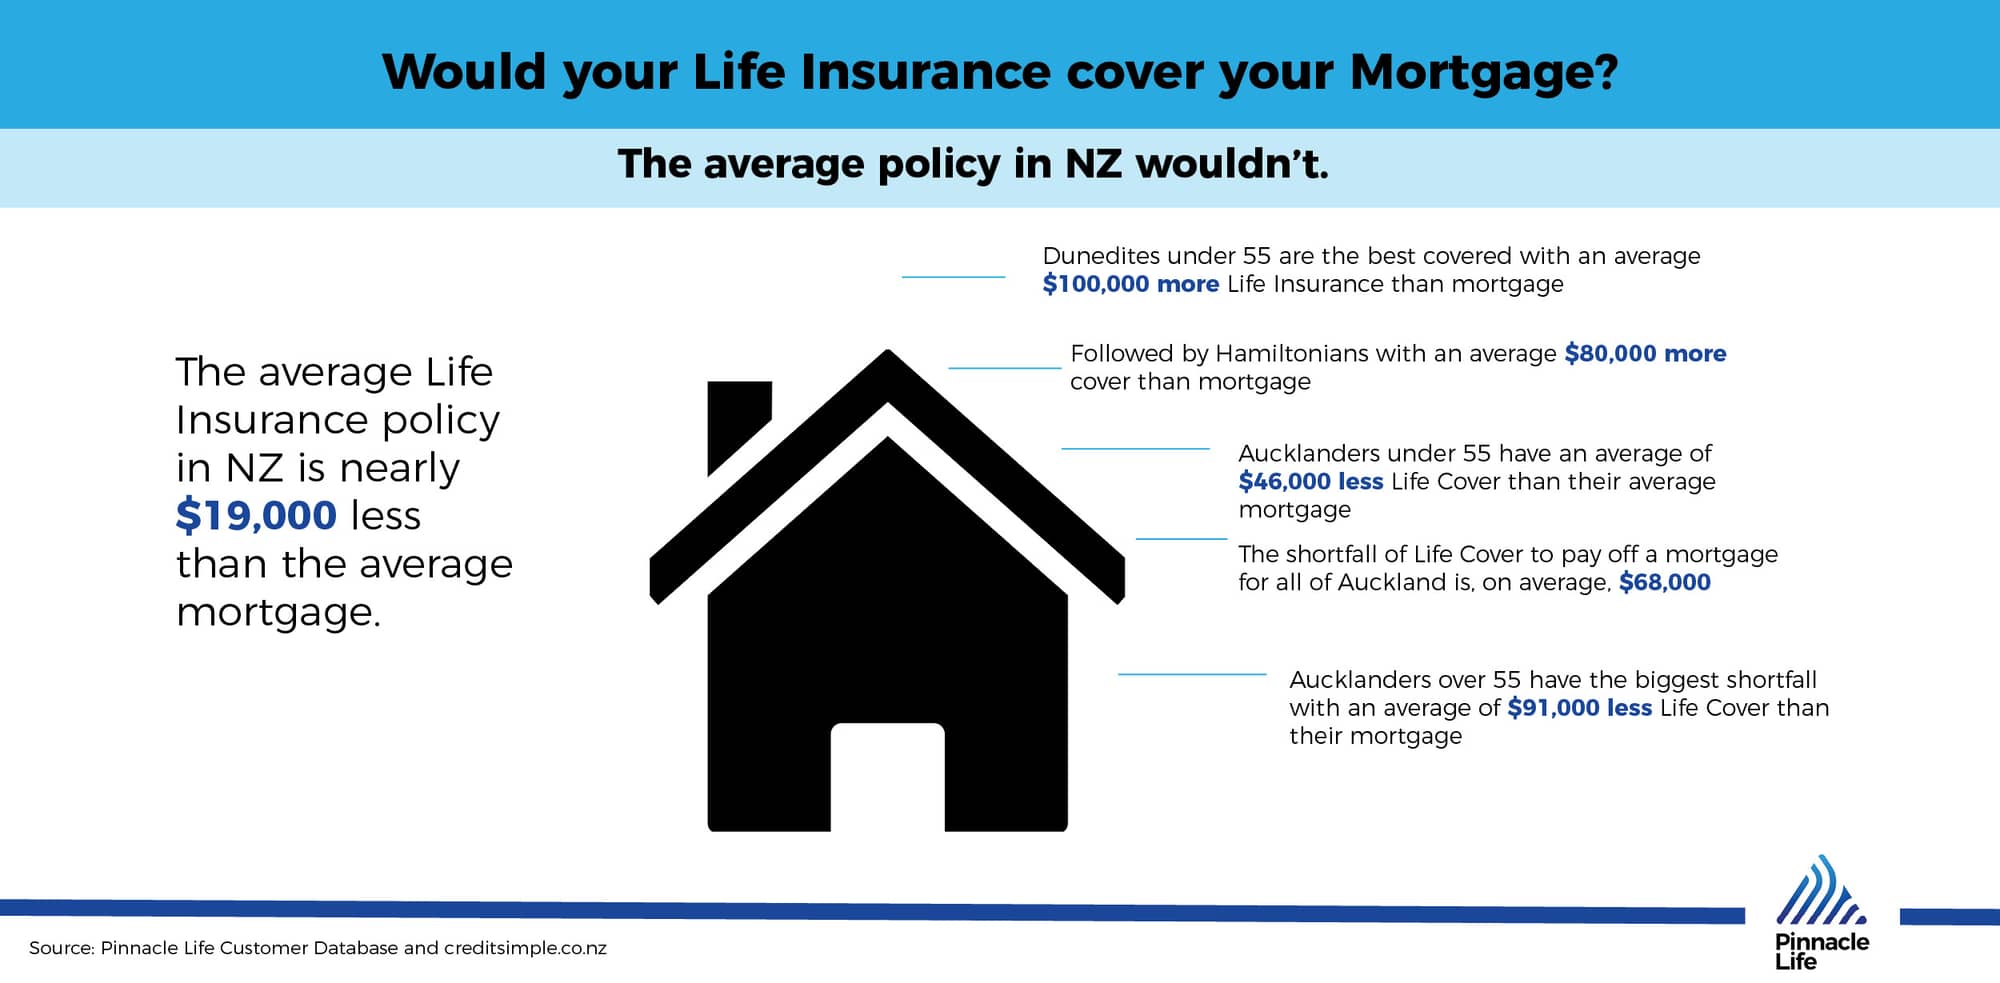 Would your Life Insurance cover your mortgage?